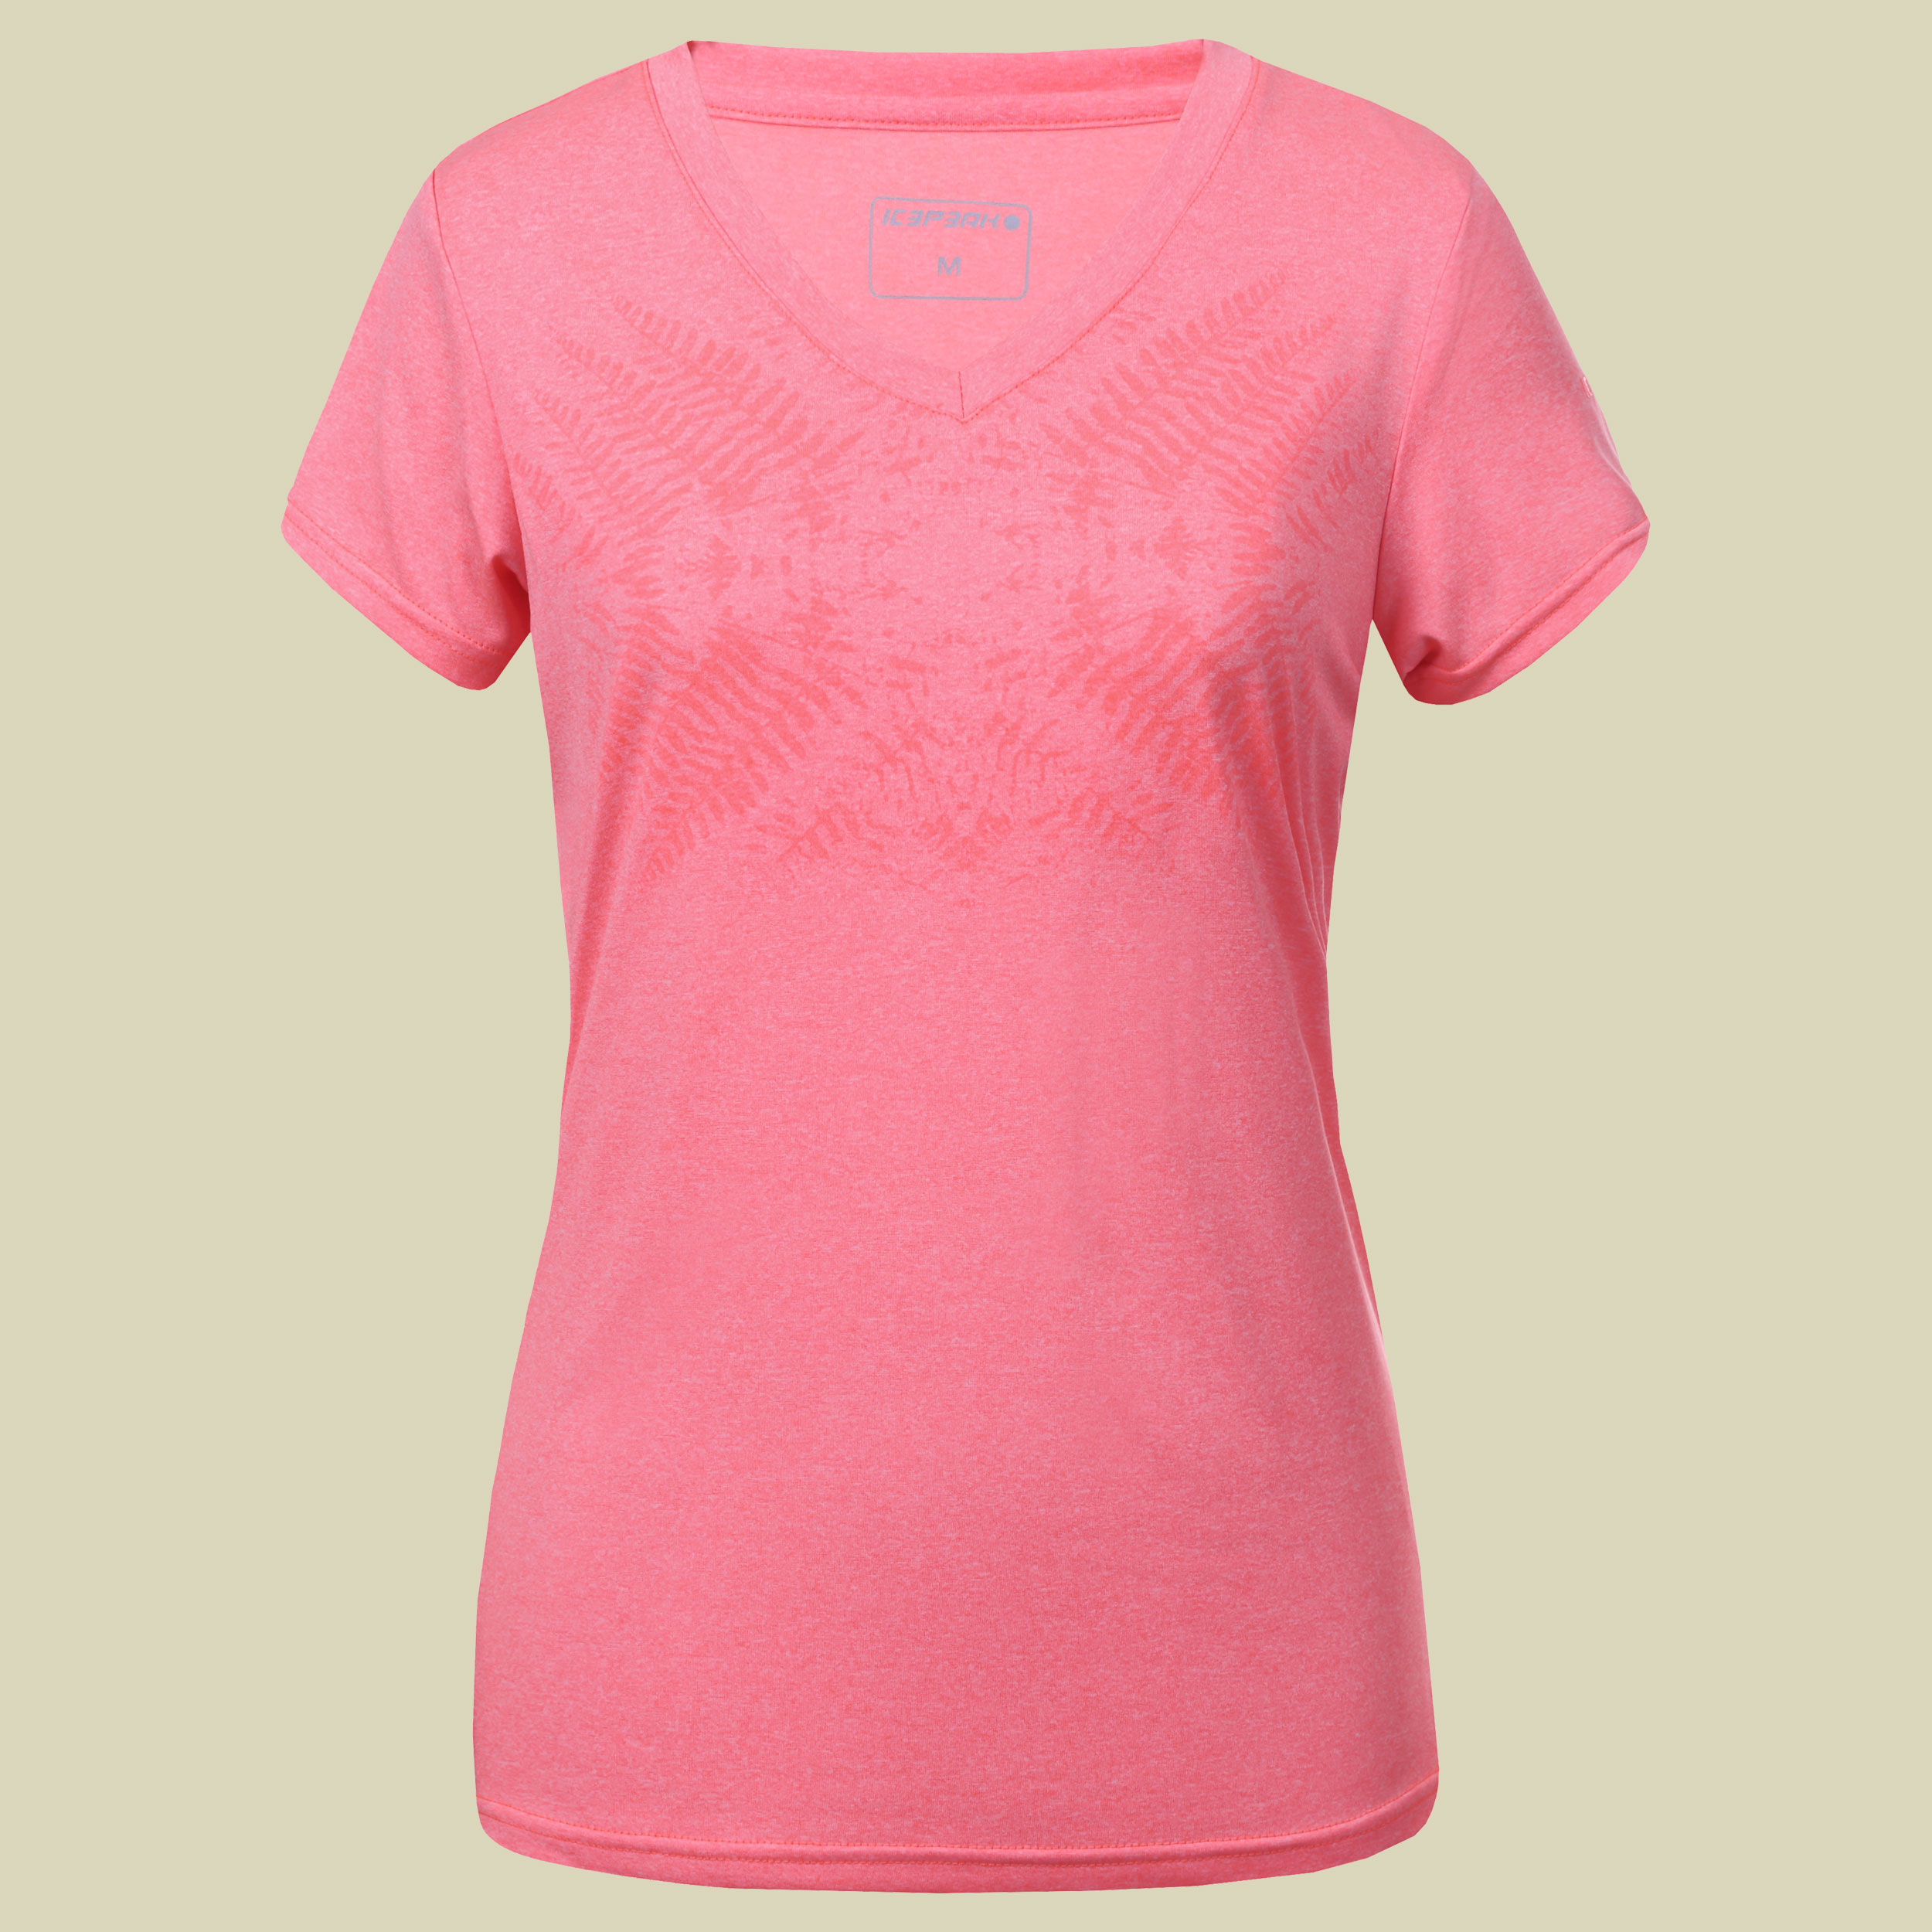 Sumitra T-Shirt Women 54675 626 Größe M  Farbe FB643 coral red